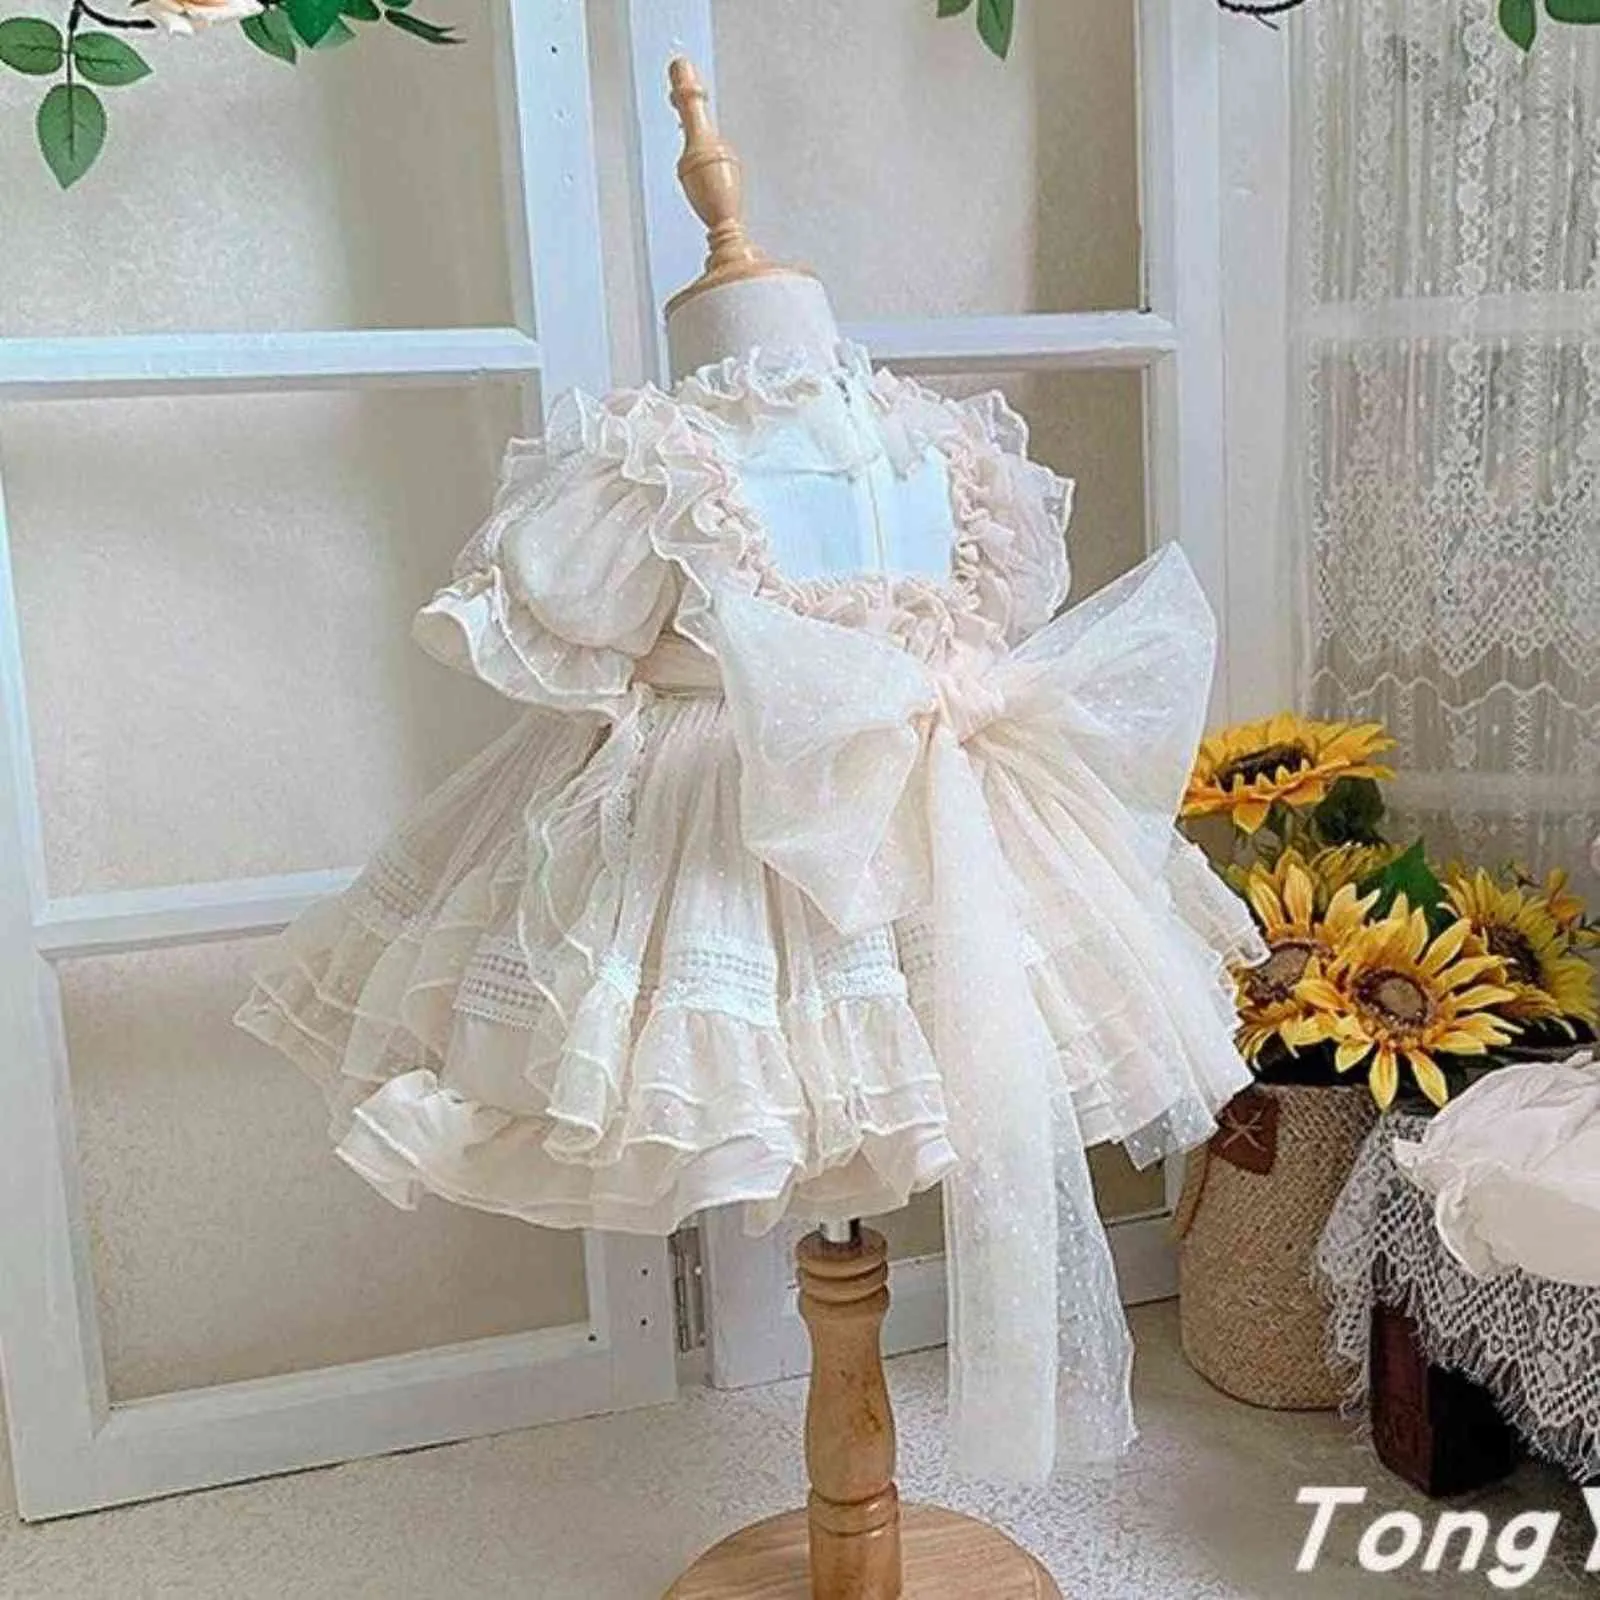 Spanish Vintage Lolita Baby Girls Dress Lace Mesh Print Birthday Party Easter Cute Princess Dresses For Girl 12M-6T A164 G1129